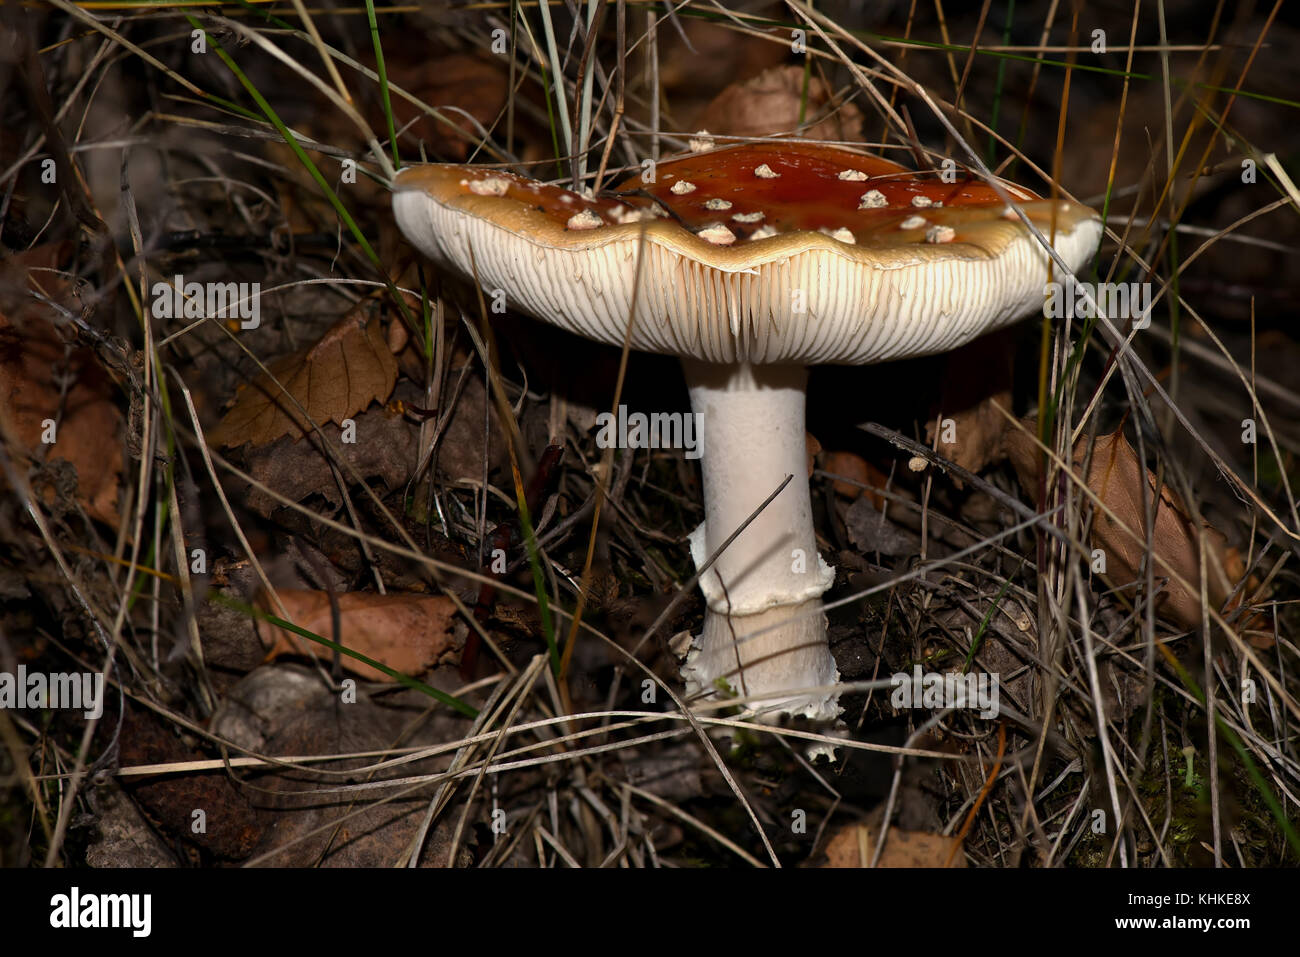 Beautiful mushroom amanita with a red hat and white speckled growing in the grass in the forest Stock Photo